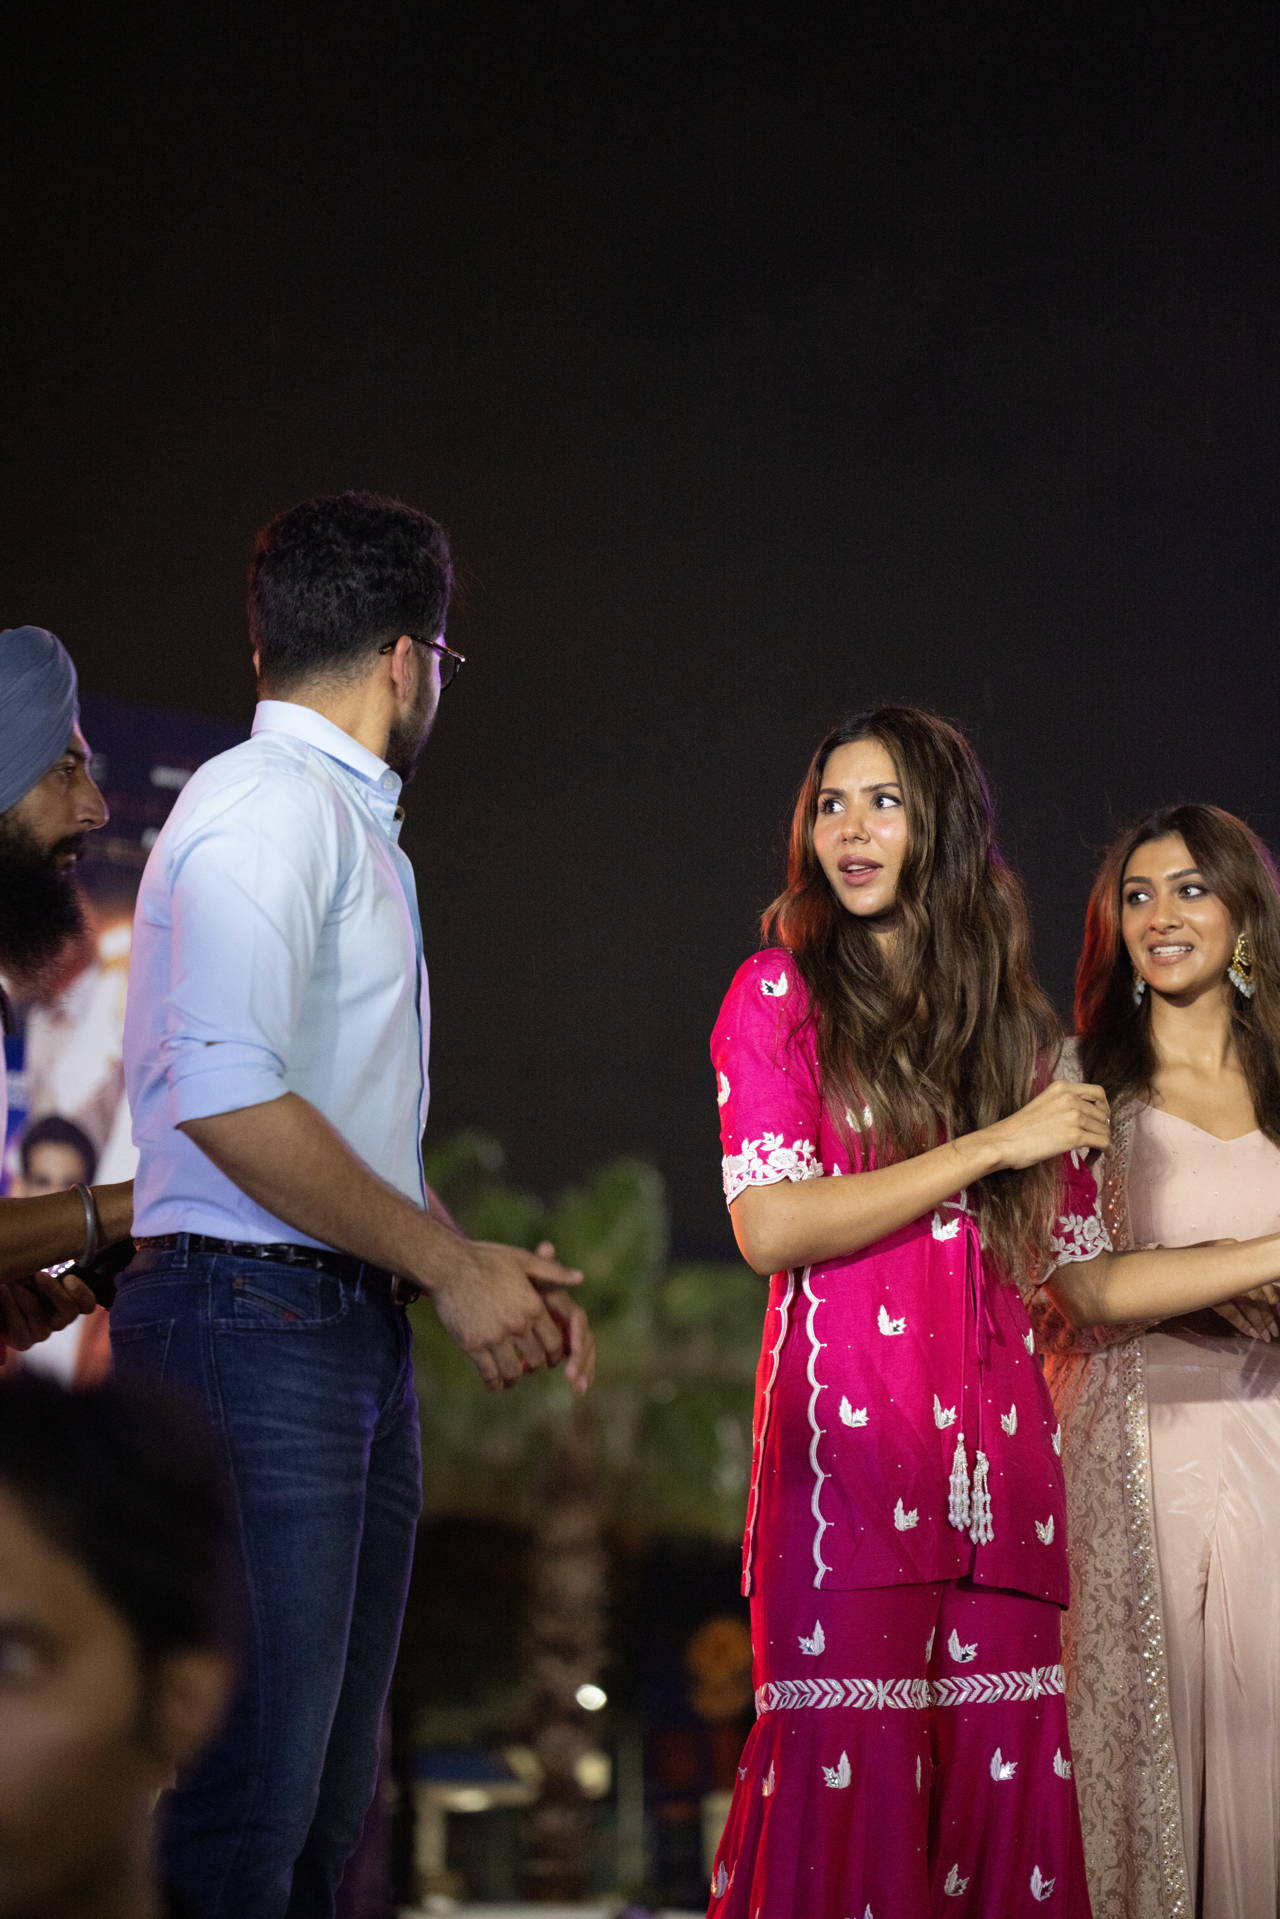 Sonam Bajwa, Fazilpuria, Navv Inder and others join the delightful musical night at Pacific Mall Tagore Garden